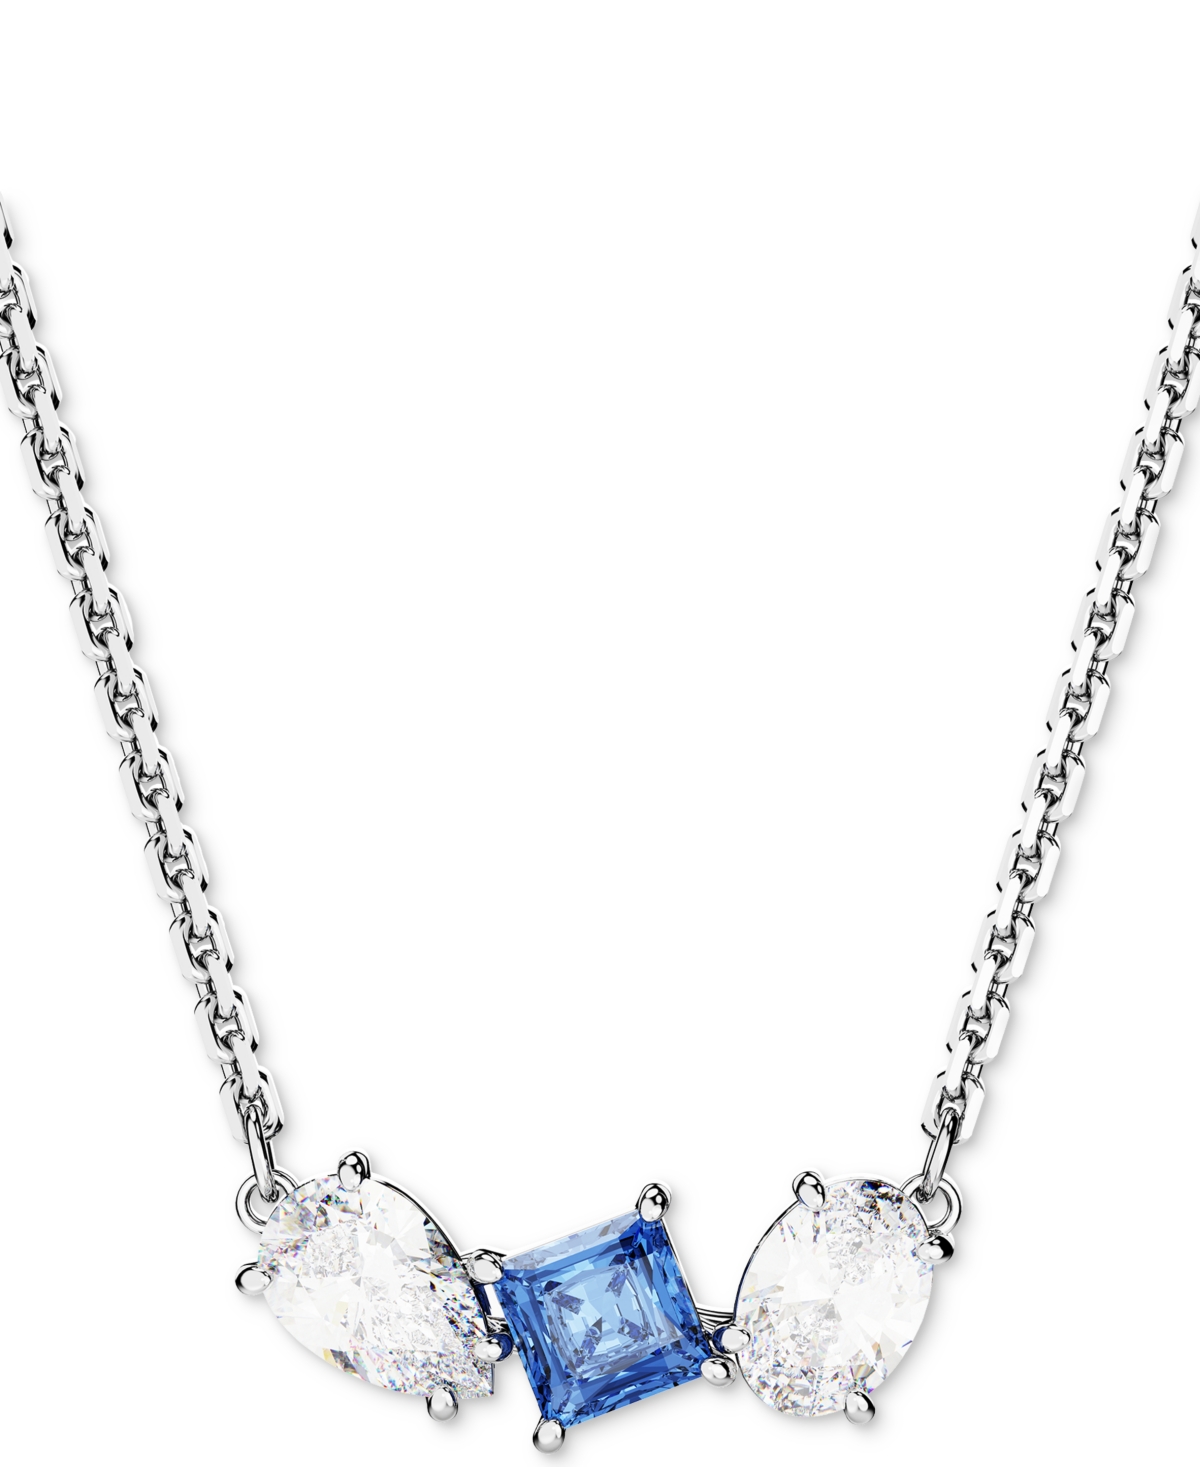 Swarovski Rhodium-plated Mixed Crystal Pendant Necklace, 15" + 2-3/4" Extender In Blue